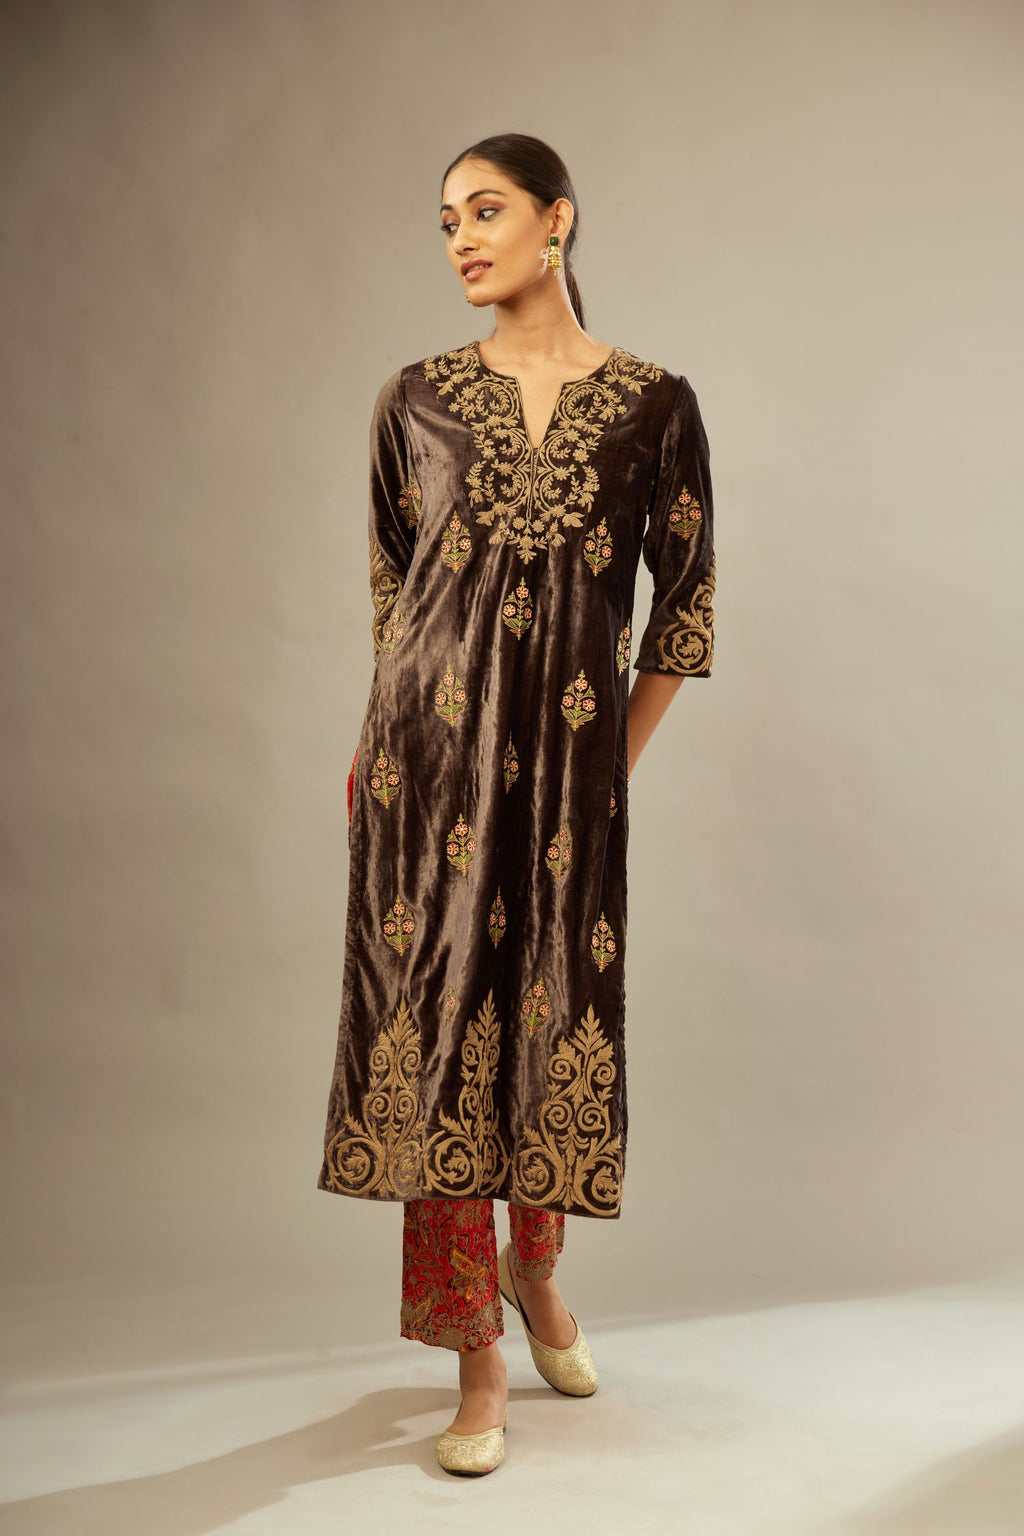 Grey silk velvet lined kurta set with light gold dori embroidery and contrast colored boota all-over the kurta.